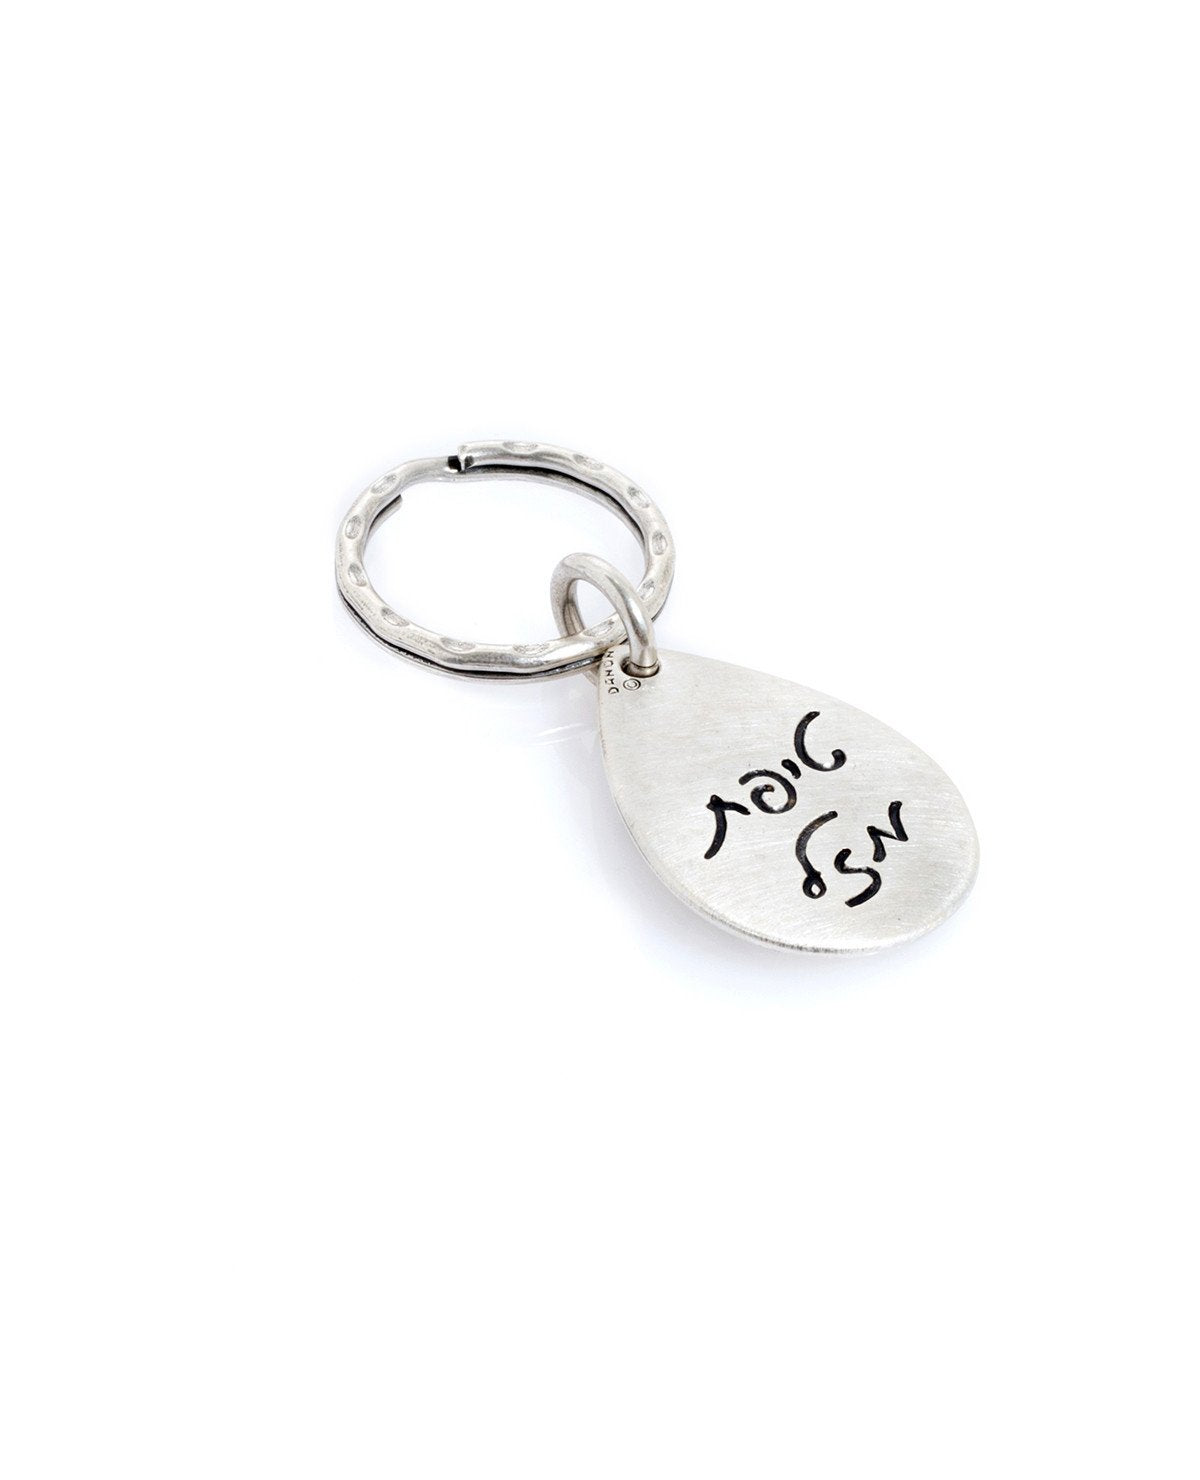 A beautiful and optimistic keychain.
Designed in the shape of a drop, one side has the words "Drop of Luck" written on it, and on the other side is an embossed Hamsa embedded with a turquoise colored stone.
The keychain is coated in sterling silver and is strong and reliable.
Makes a great gift for anyone who we wish good luck upon, and for those who we want our blessing to always be kept very close to them.  Length: 3 cm  Width: 2 cm